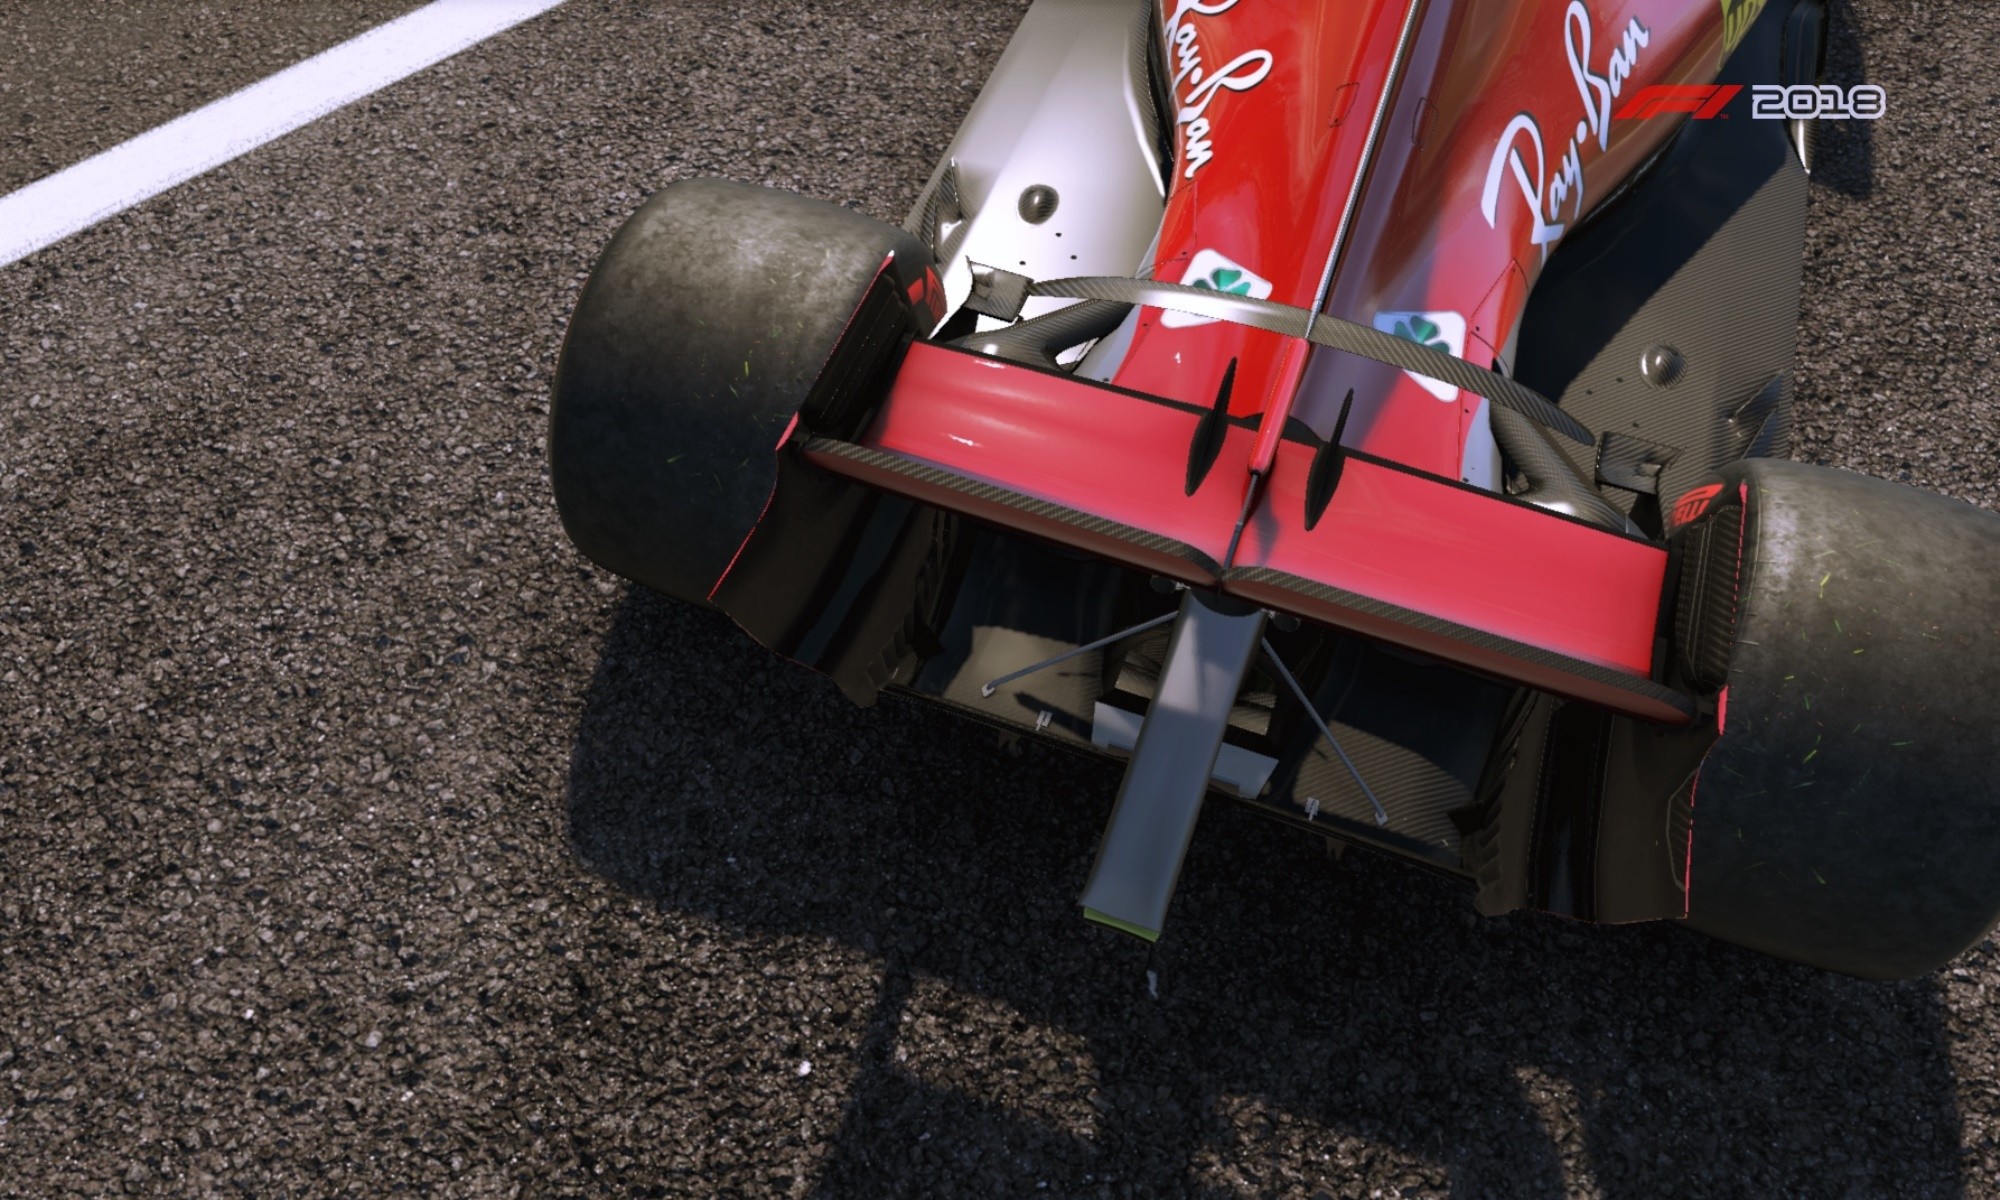 F1 2018 Classic Cars: Which ones are in the game?